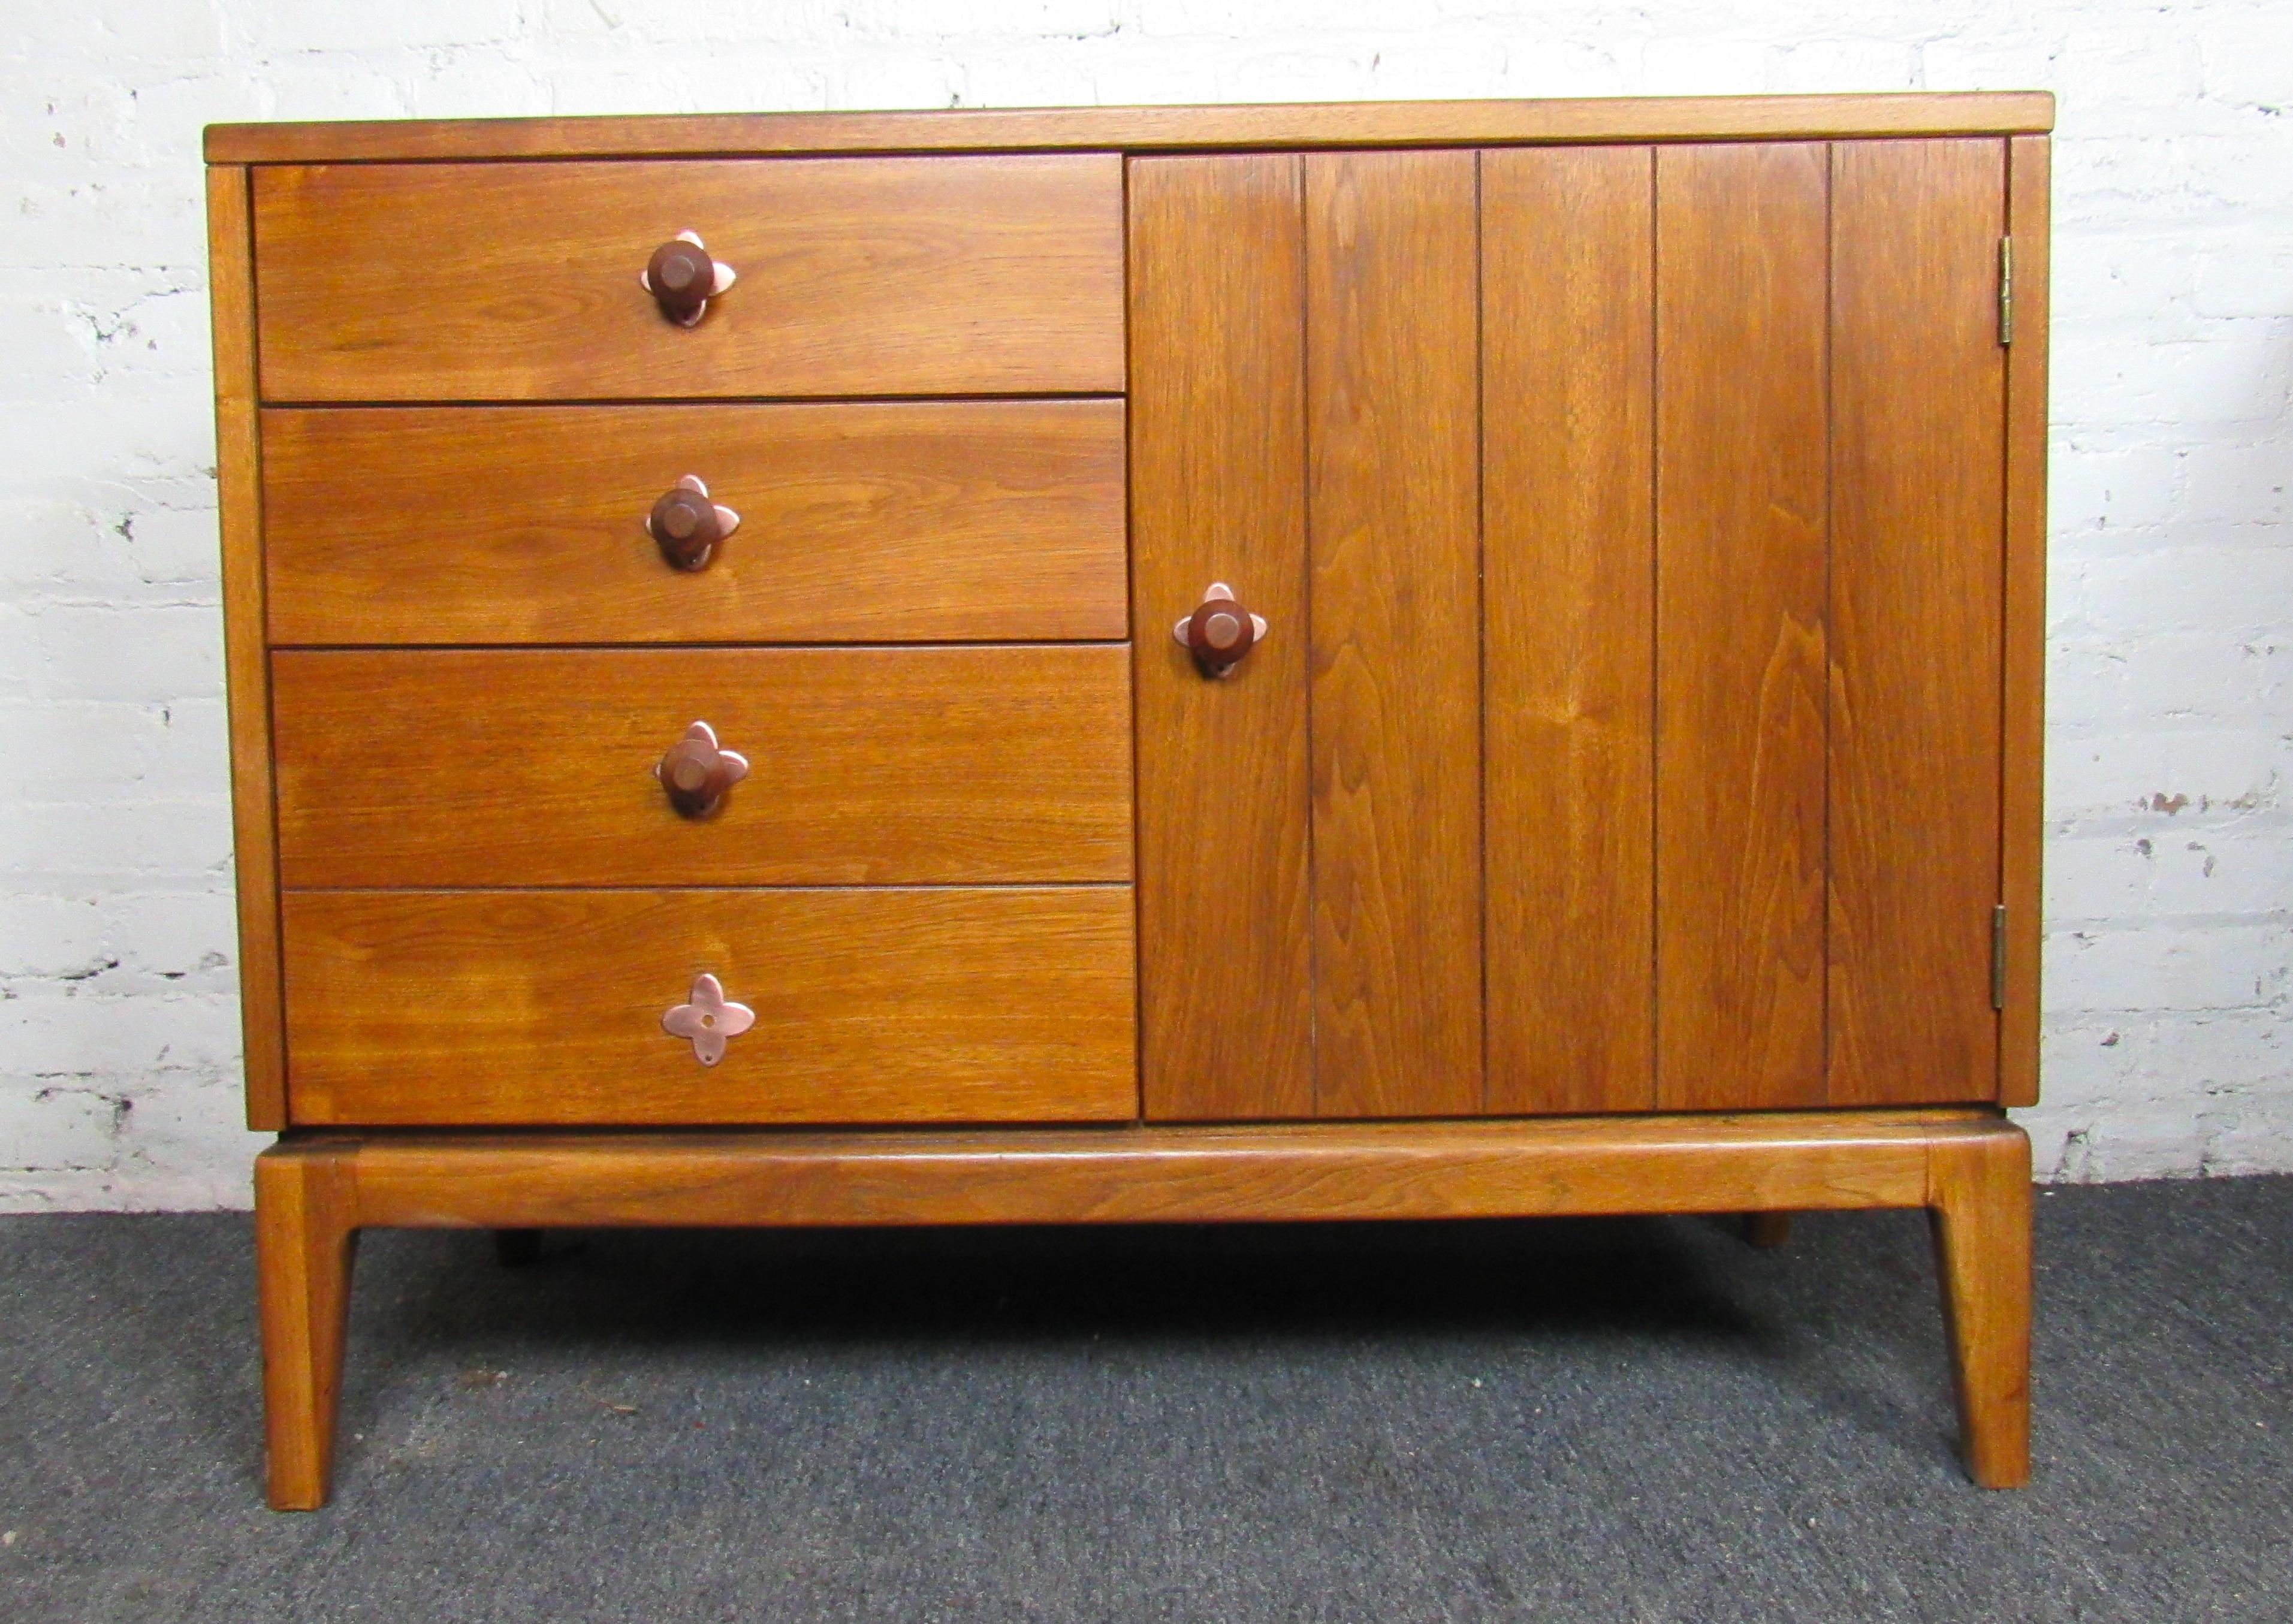 Vintage modern solid Walnut cabinet. Contains four spacious drawers and a large cabinet. Metal and dark wood drawer pulls. Sits on sturdy wood legs.

Please confirm item location (NY or NJ).